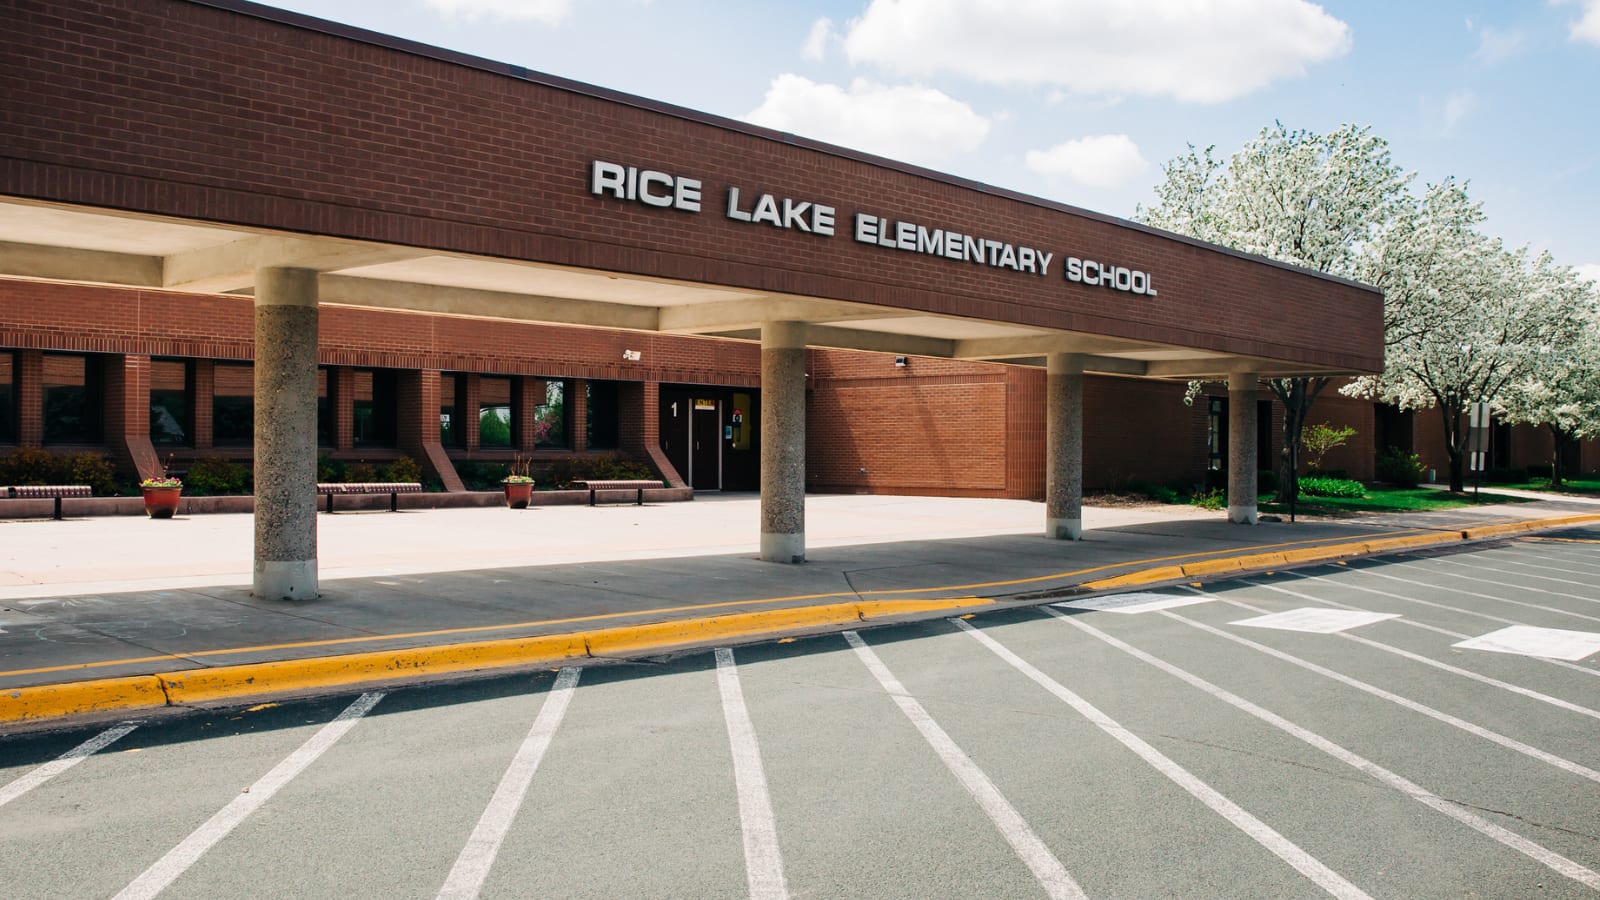 Osseo Area Schools - District 279: Rice Lake Elementary